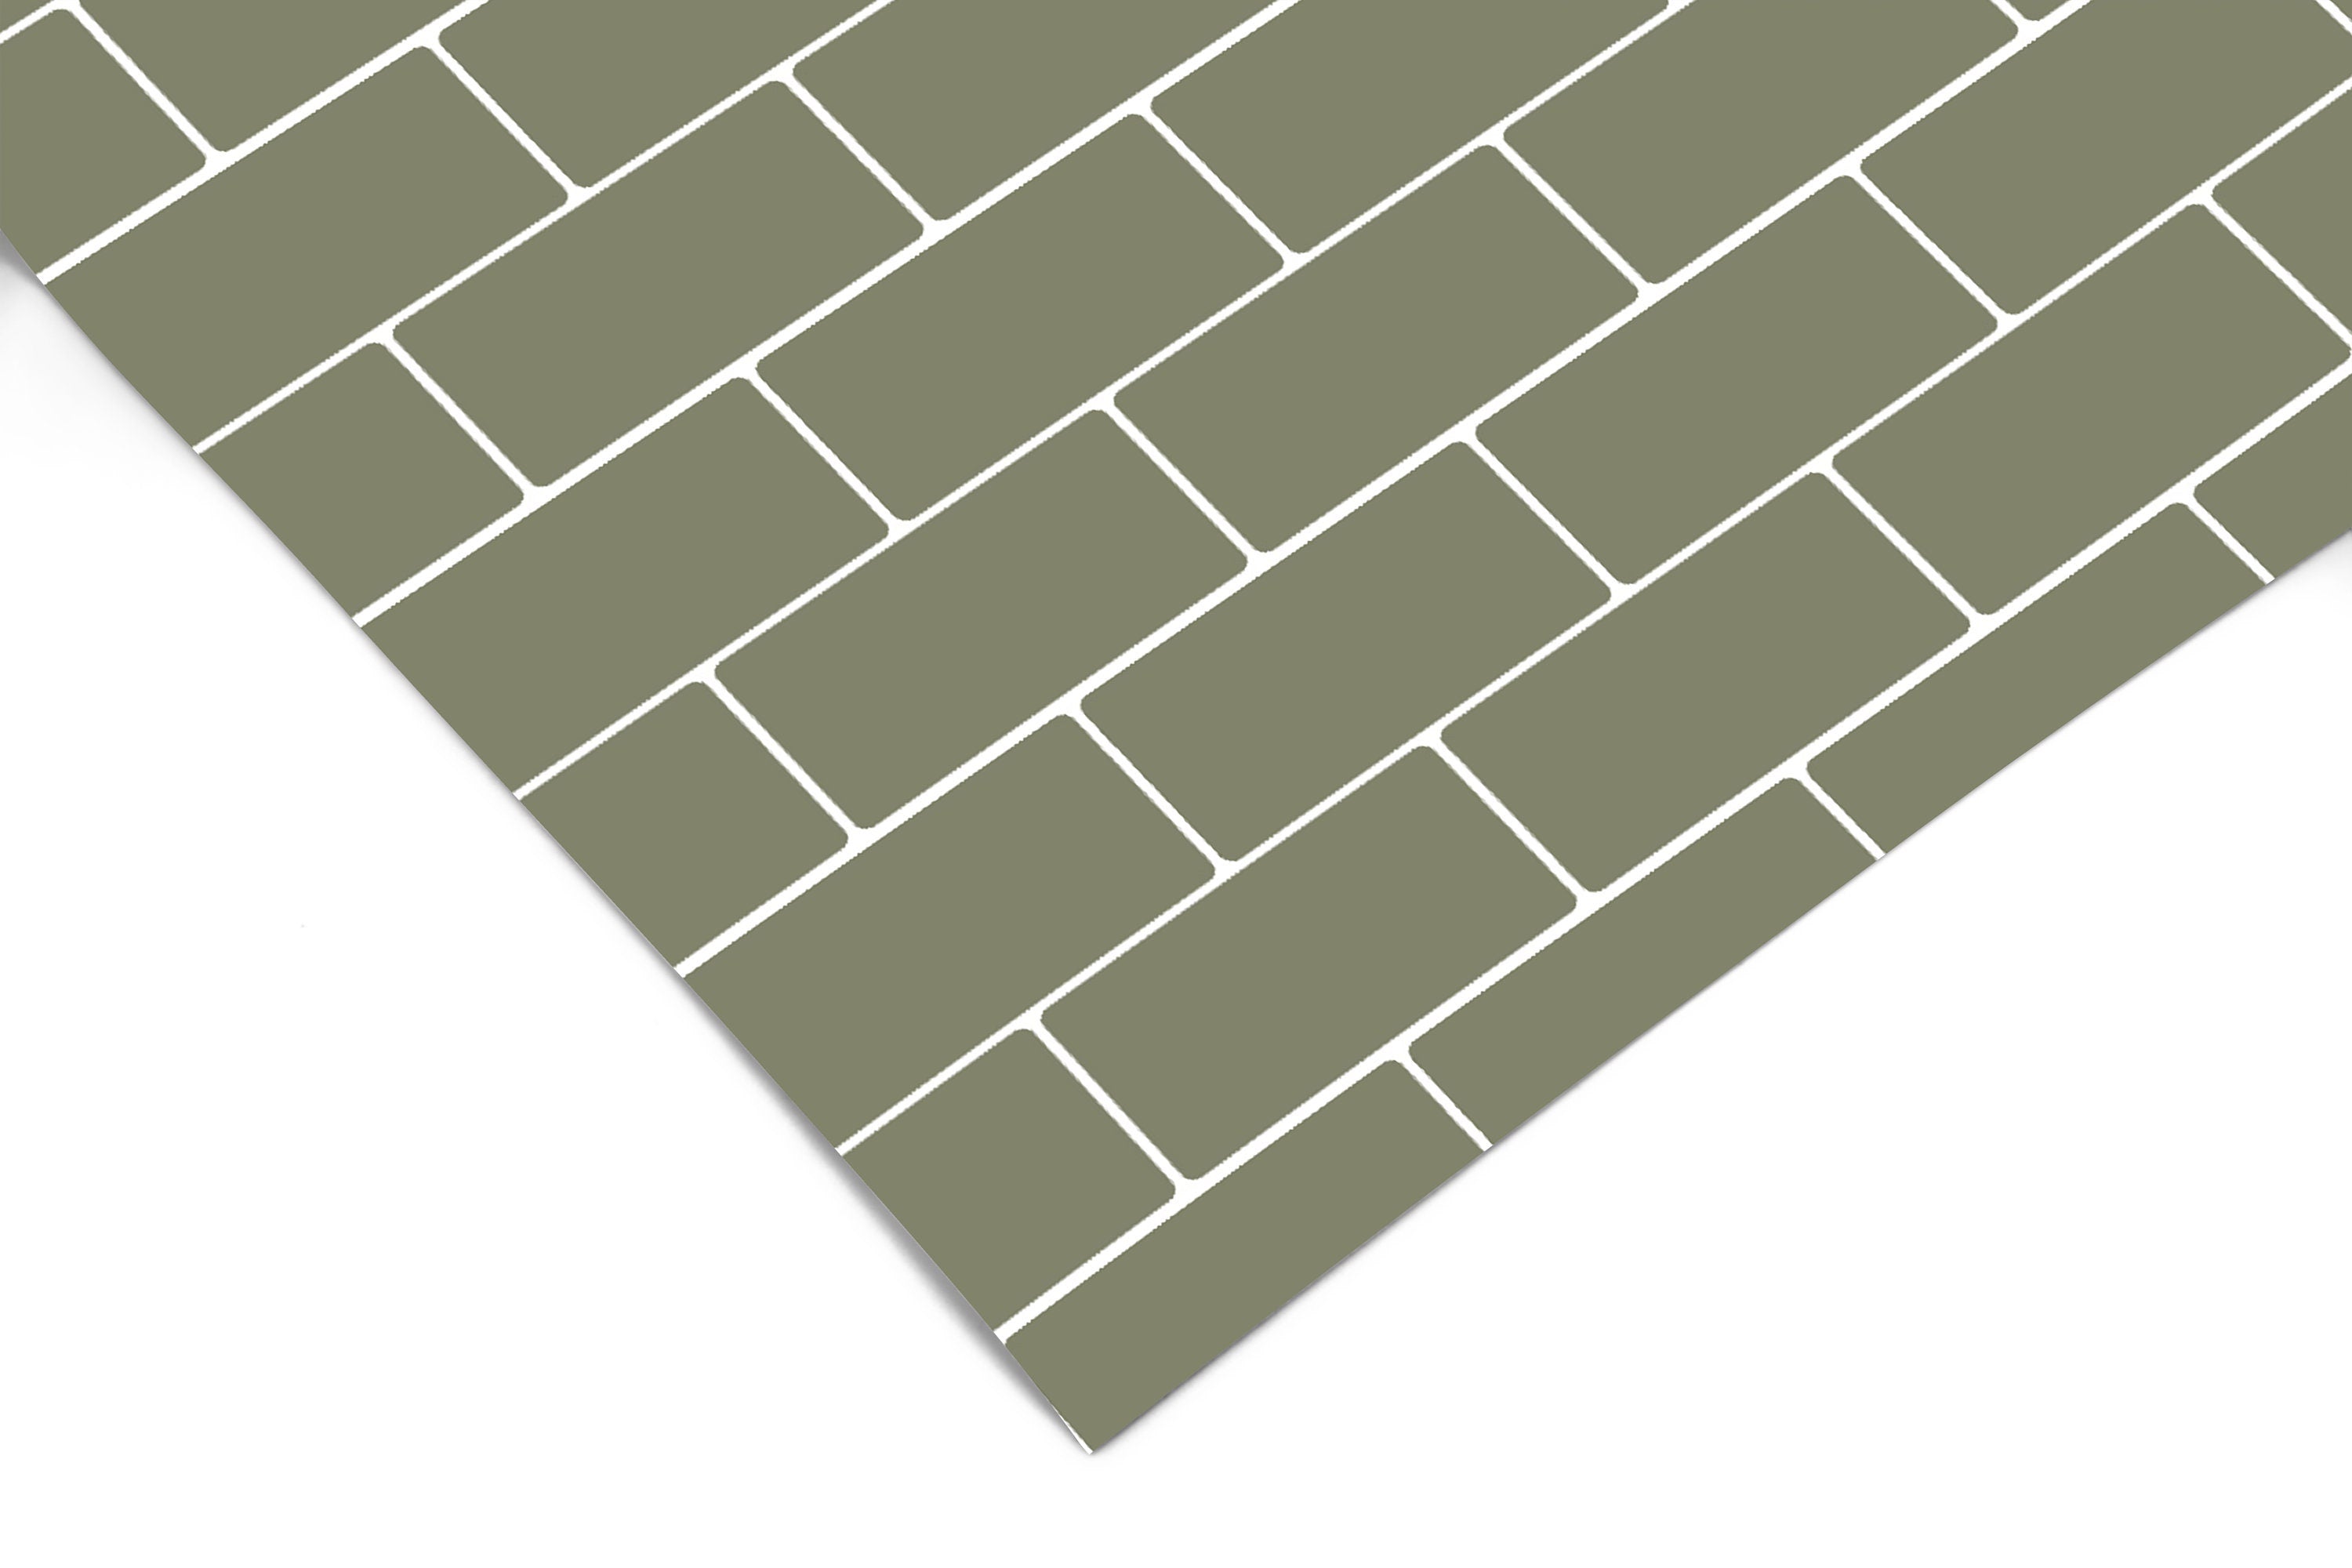 Olive Subway Tile Contact Paper | Peel And Stick Wallpaper | Removable Wallpaper | Shelf Liner | Drawer Liner | Peel and Stick Paper 689 - JamesAndColors